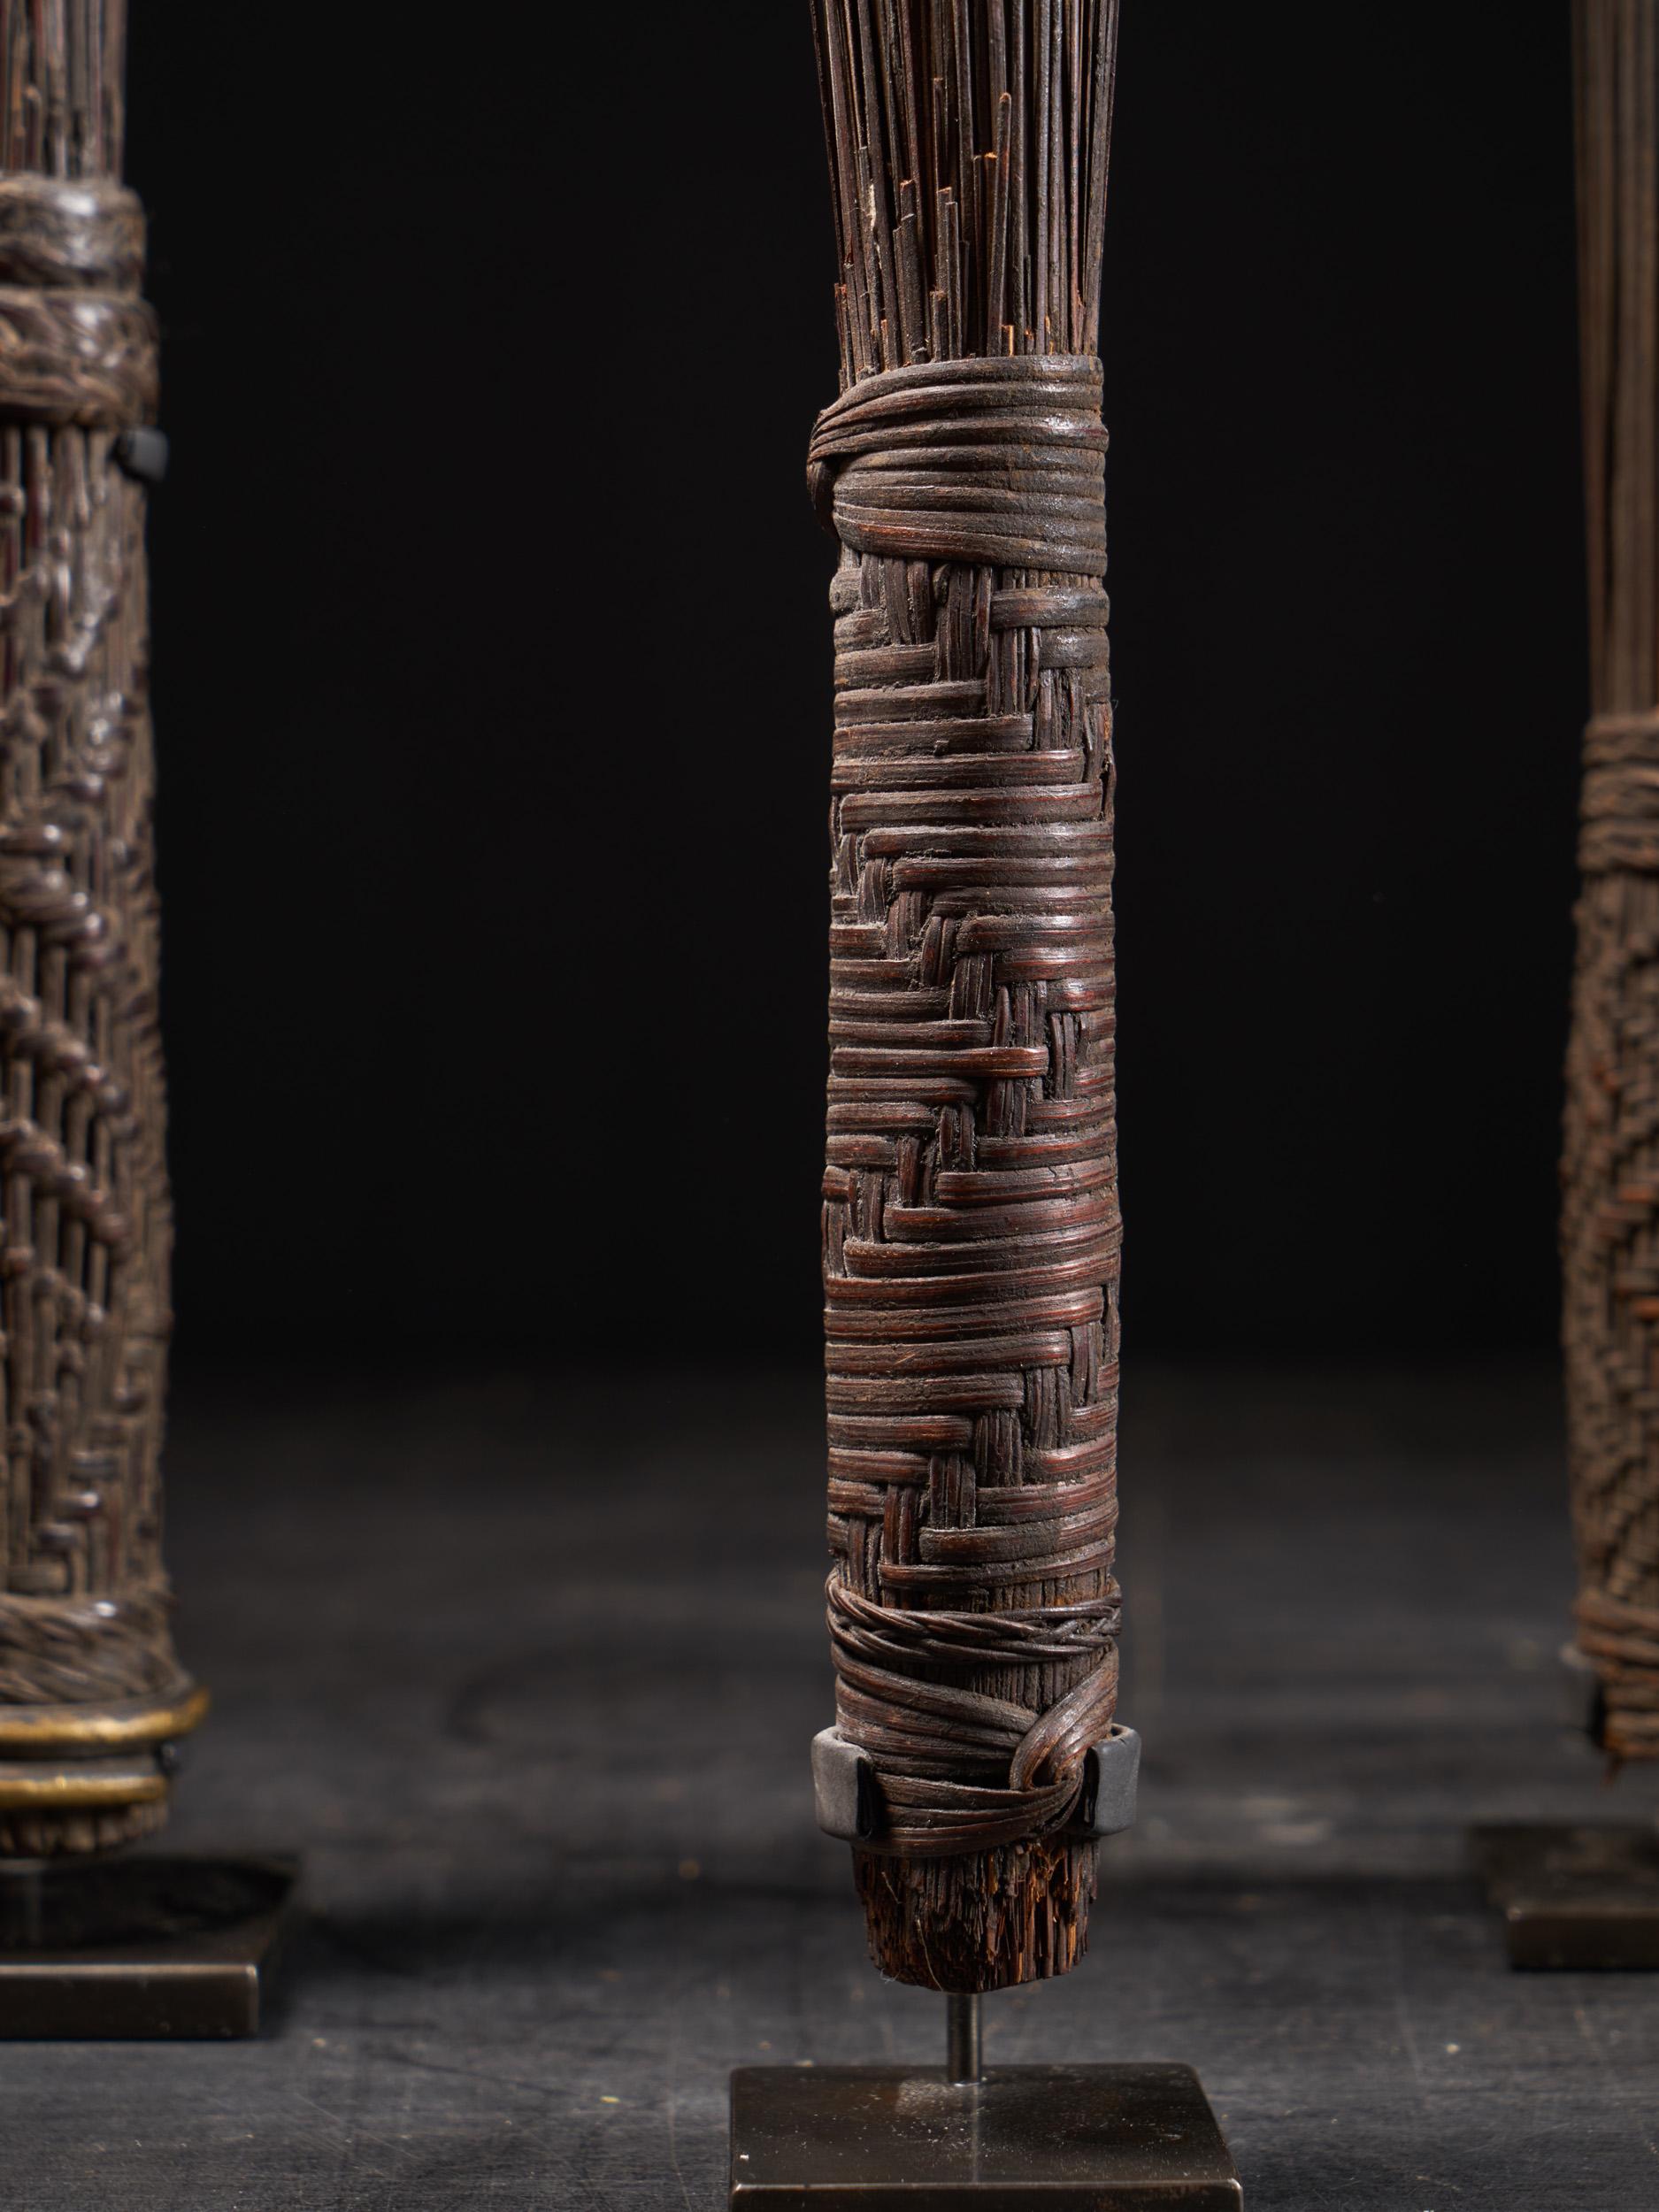 The Sceptres are made of the Midrib of Palm tree leaves. They were used by the Lilwaa Secret Society of the Mbole Tribe members who live in the South-Western part of Kongo. The finishing is very minimalistic and refined.